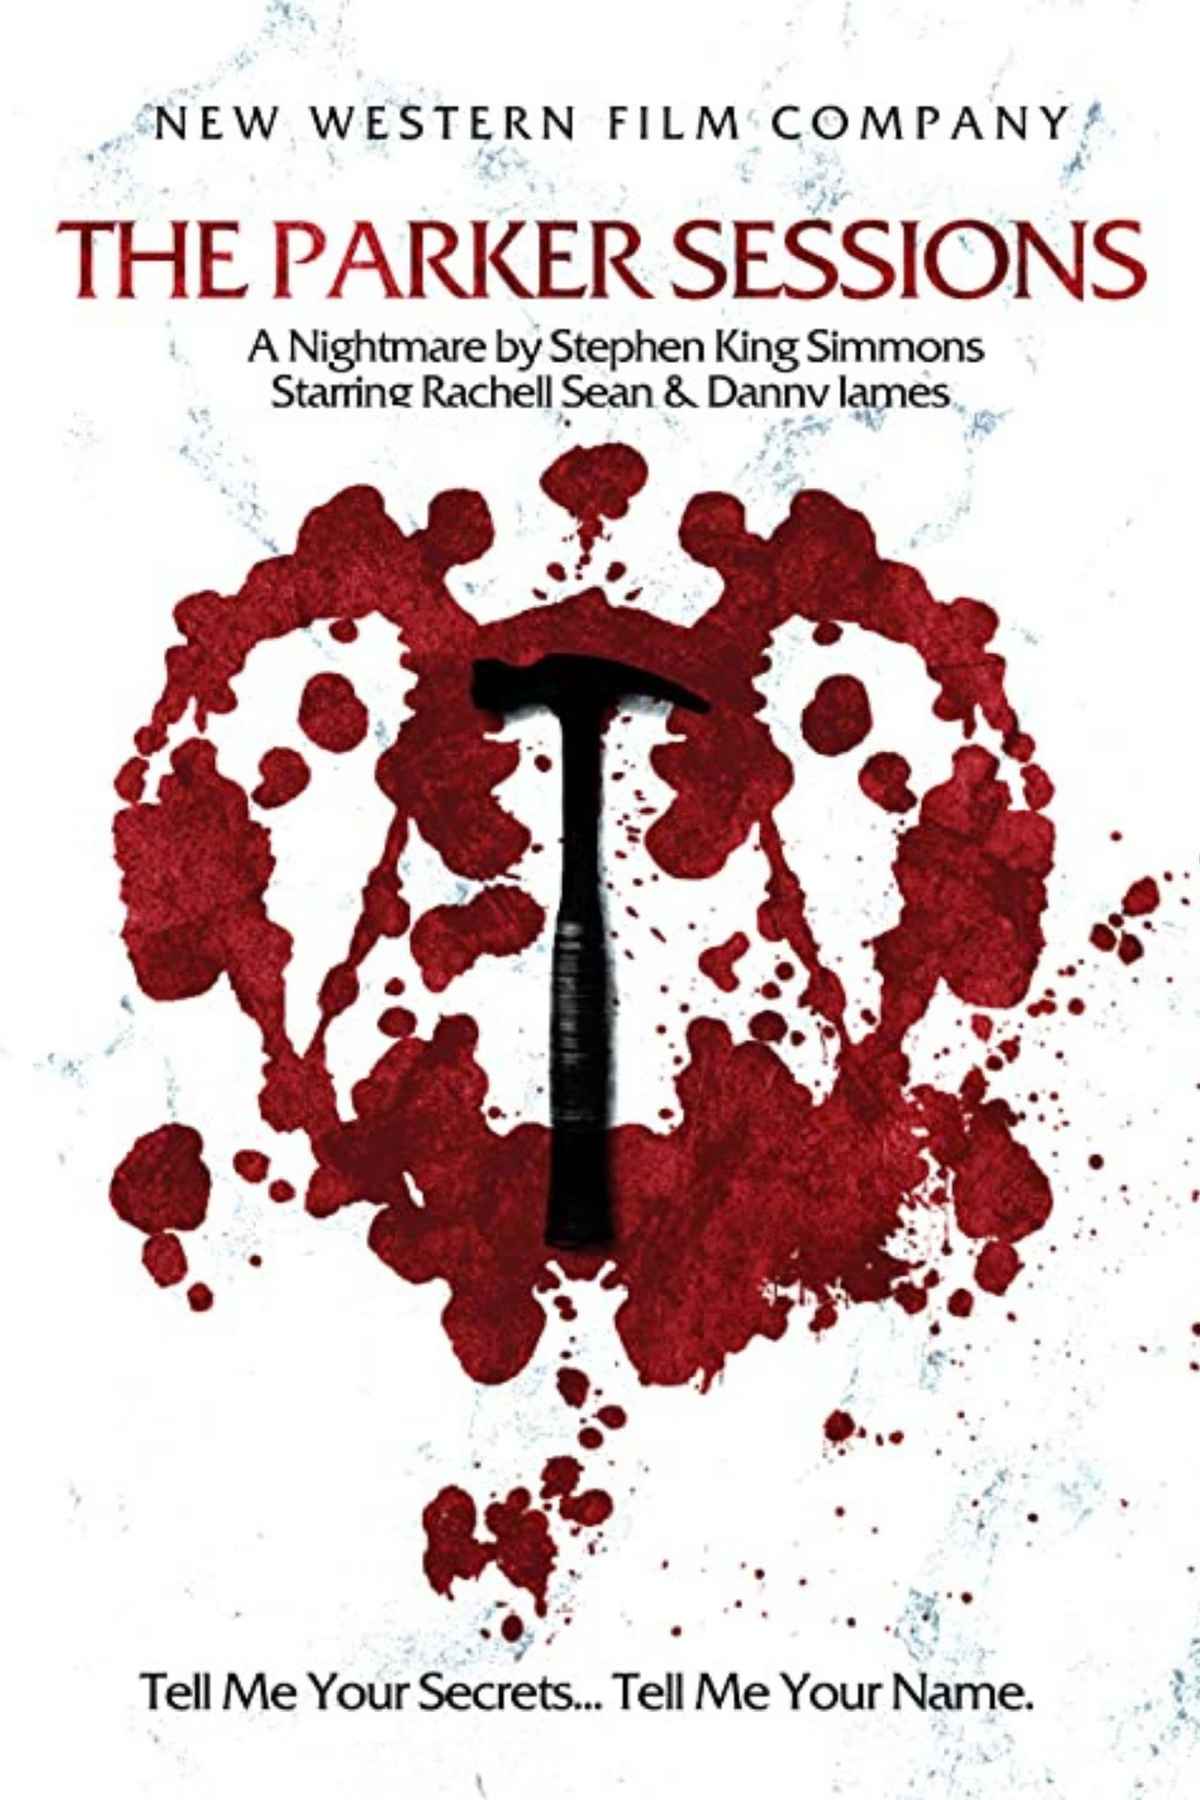 Stephen King Simmons Best Movies, TV Shows and Web Series List